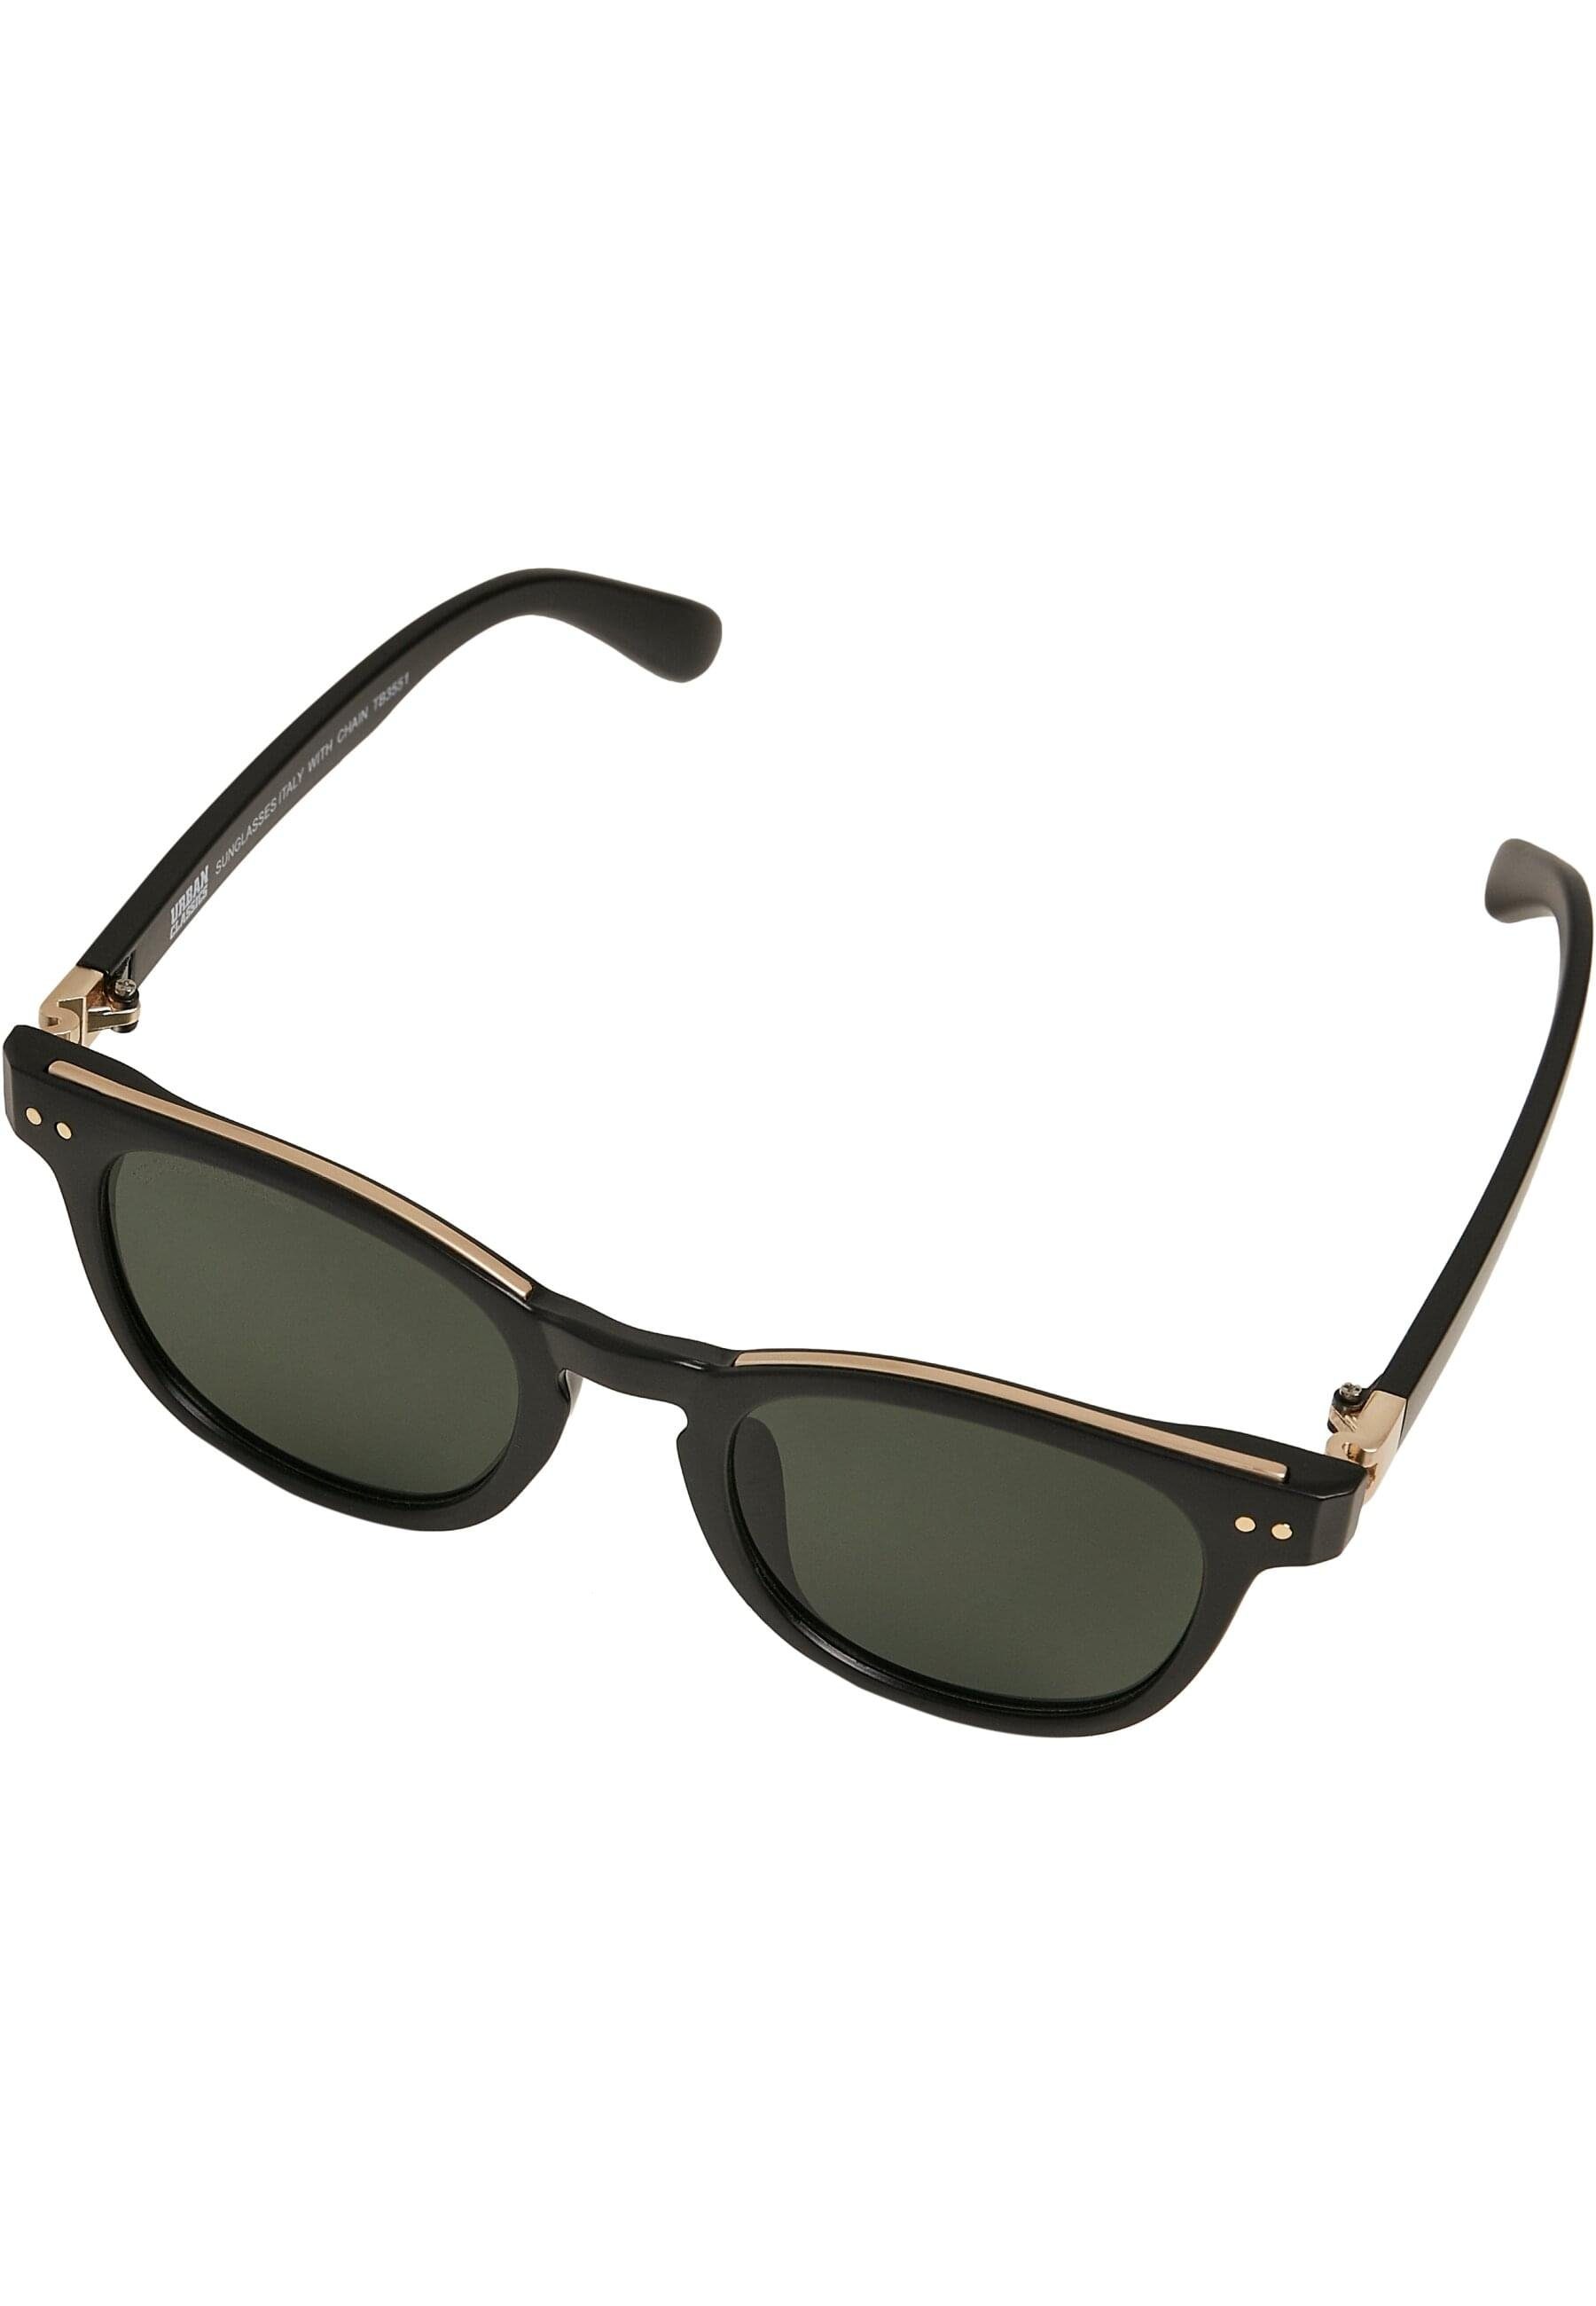 URBAN chain Italy with Unisex Sonnenbrille CLASSICS Sunglasses black/gold/gold